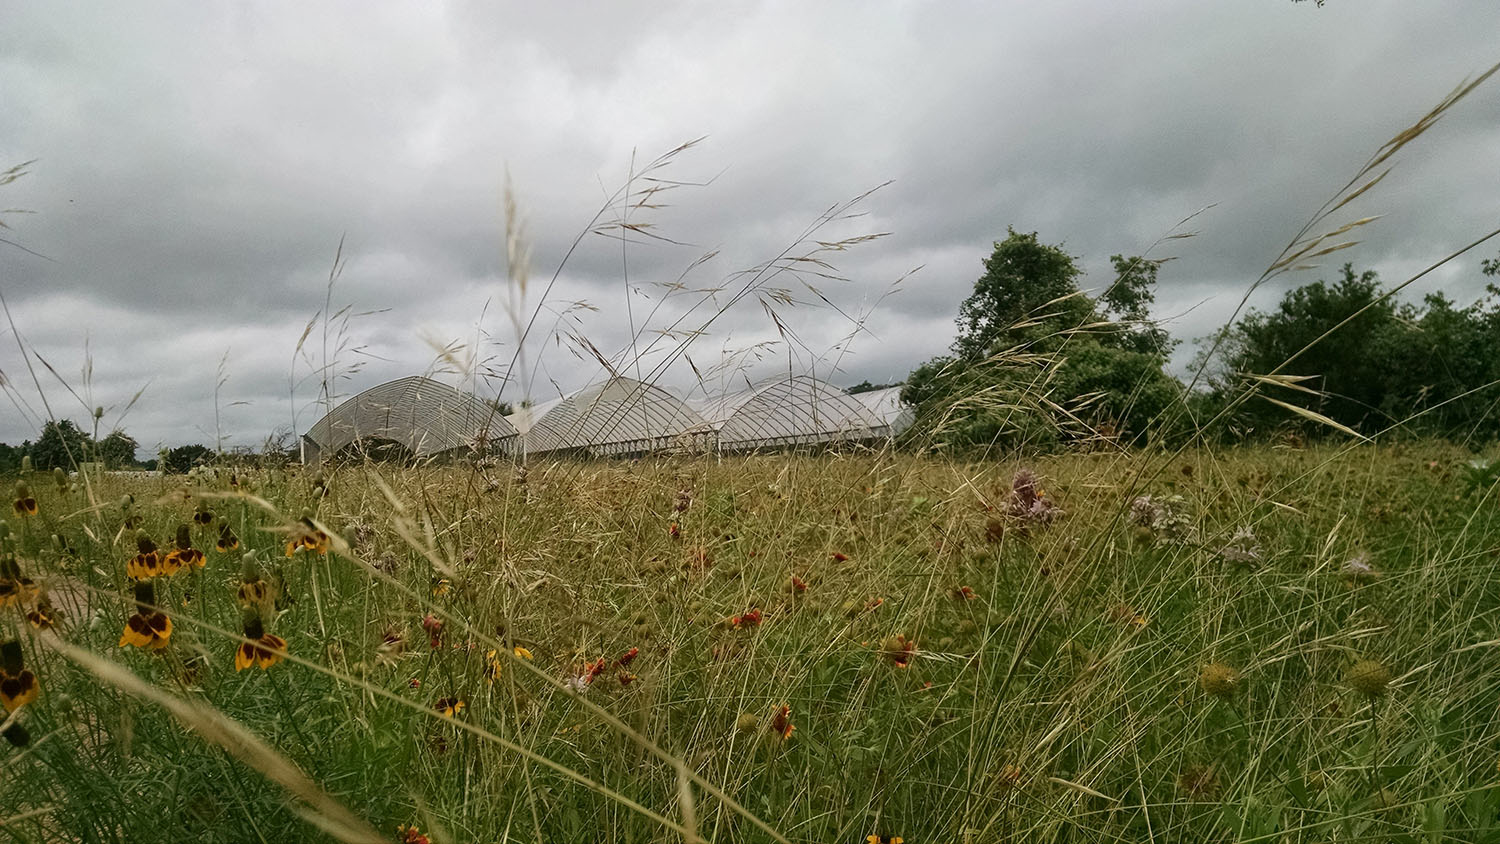 Foreground: grassland with native flowers. Background: three metal and tarp structures with dark clouds overhead.